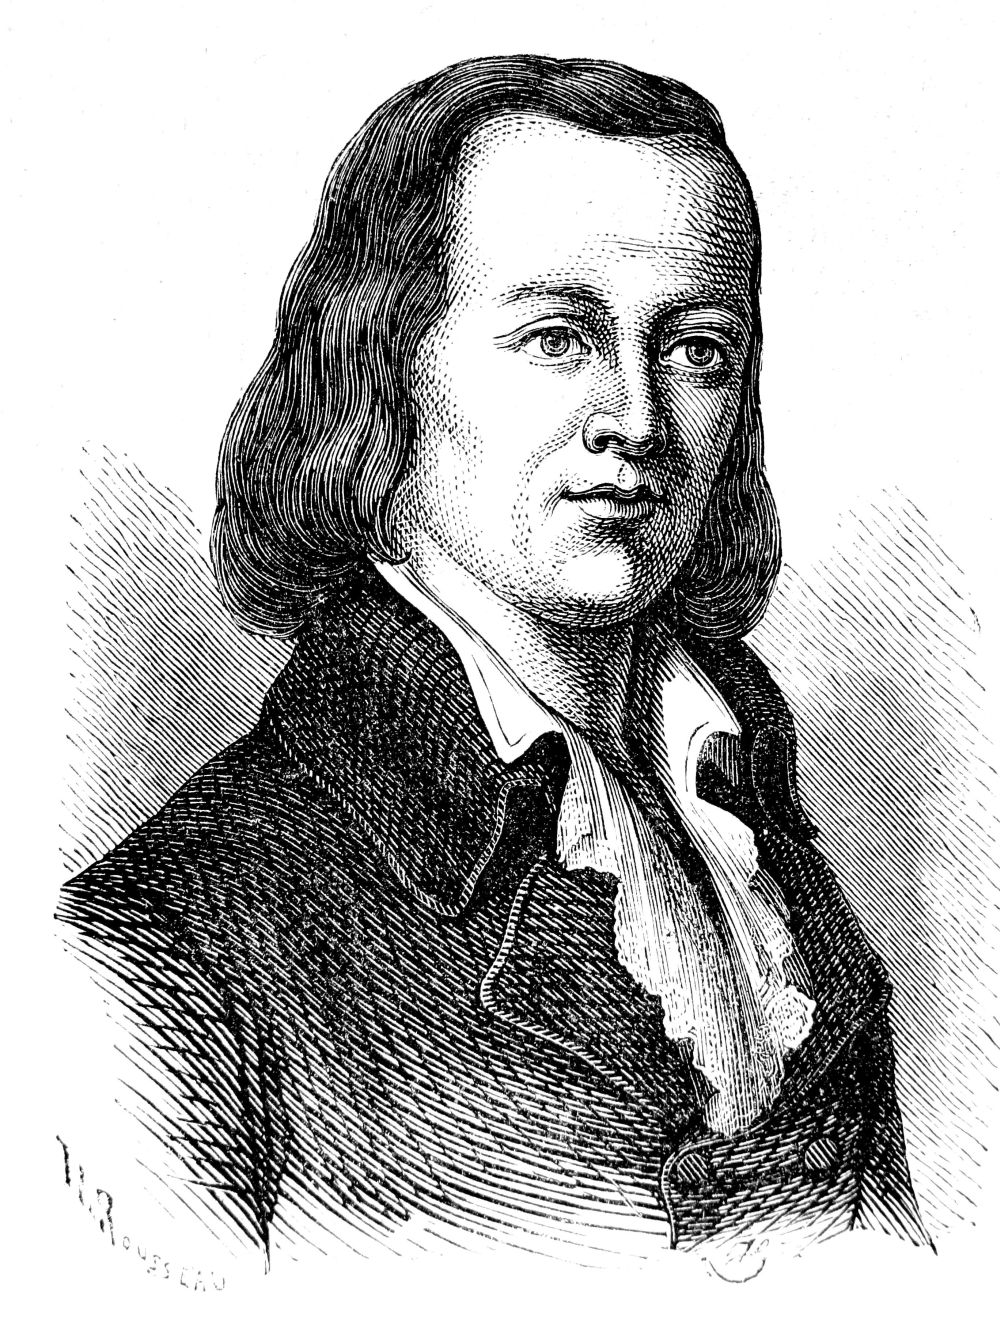 1763: The Man who Made a “Mechanical Internet” in the Era of the French Revolution